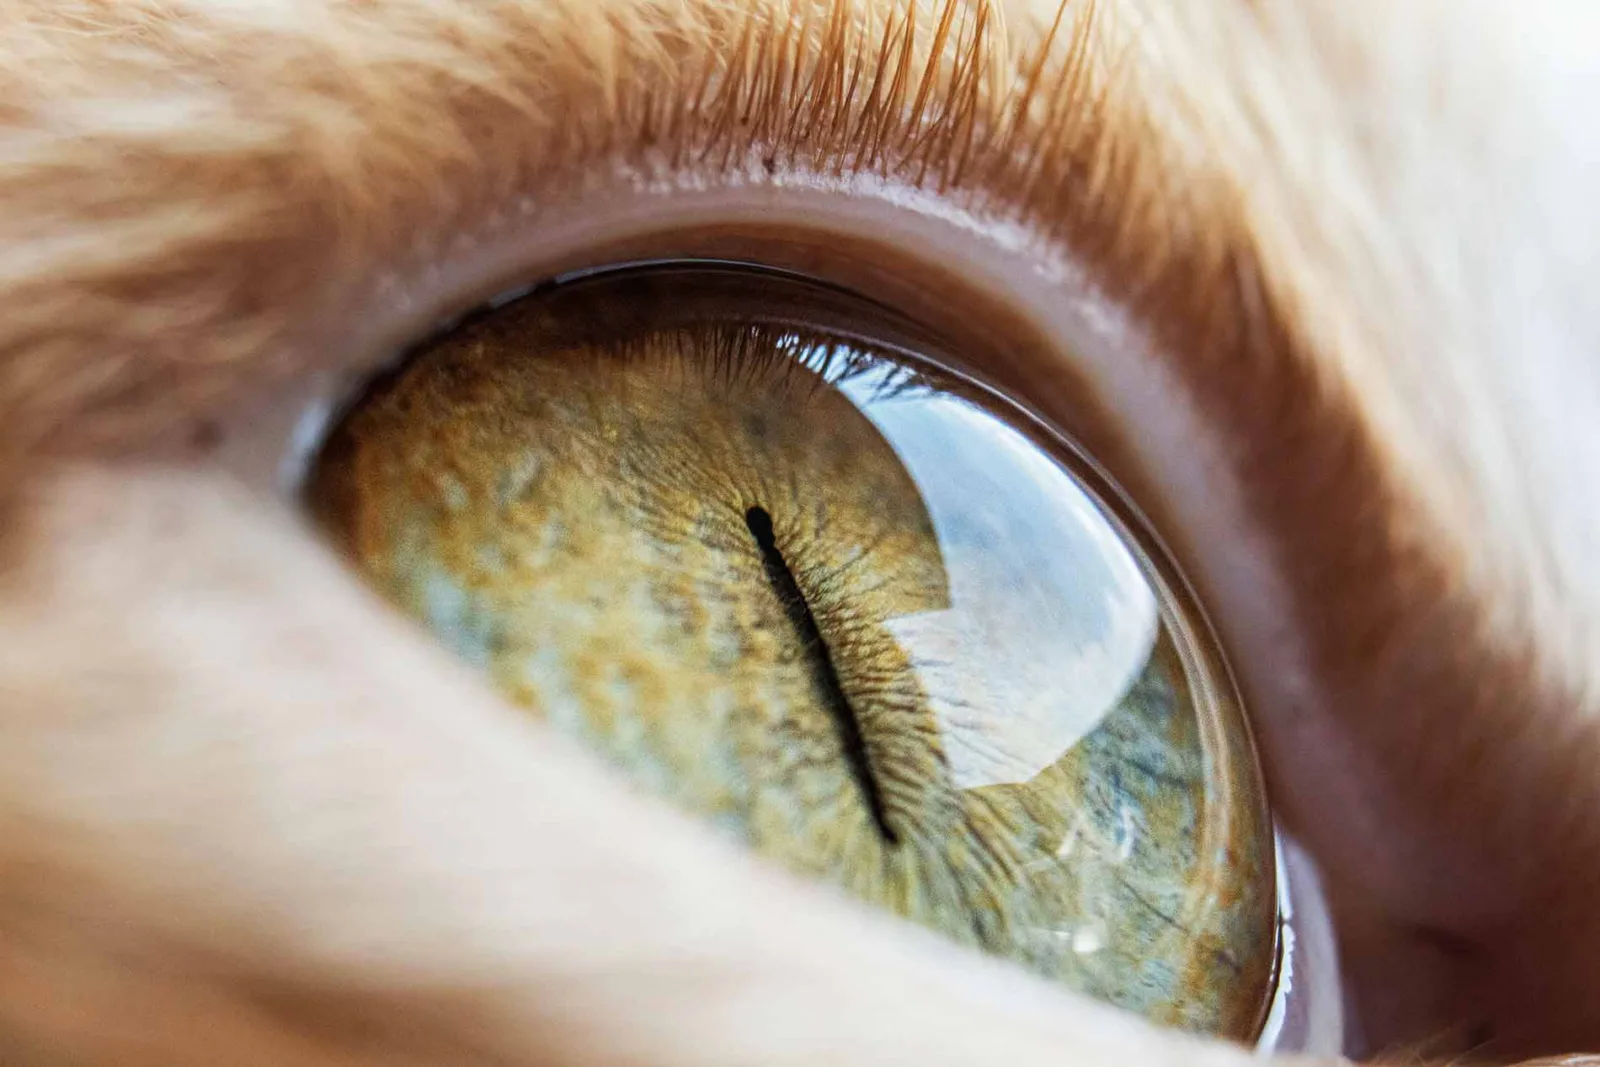 A high-resolution close-up photo of a domestic cat's eye. The eye is a brilliant green with a narrow, vertical pupil and detailed fibrous structures in the iris. The surrounding fur is soft and orange.